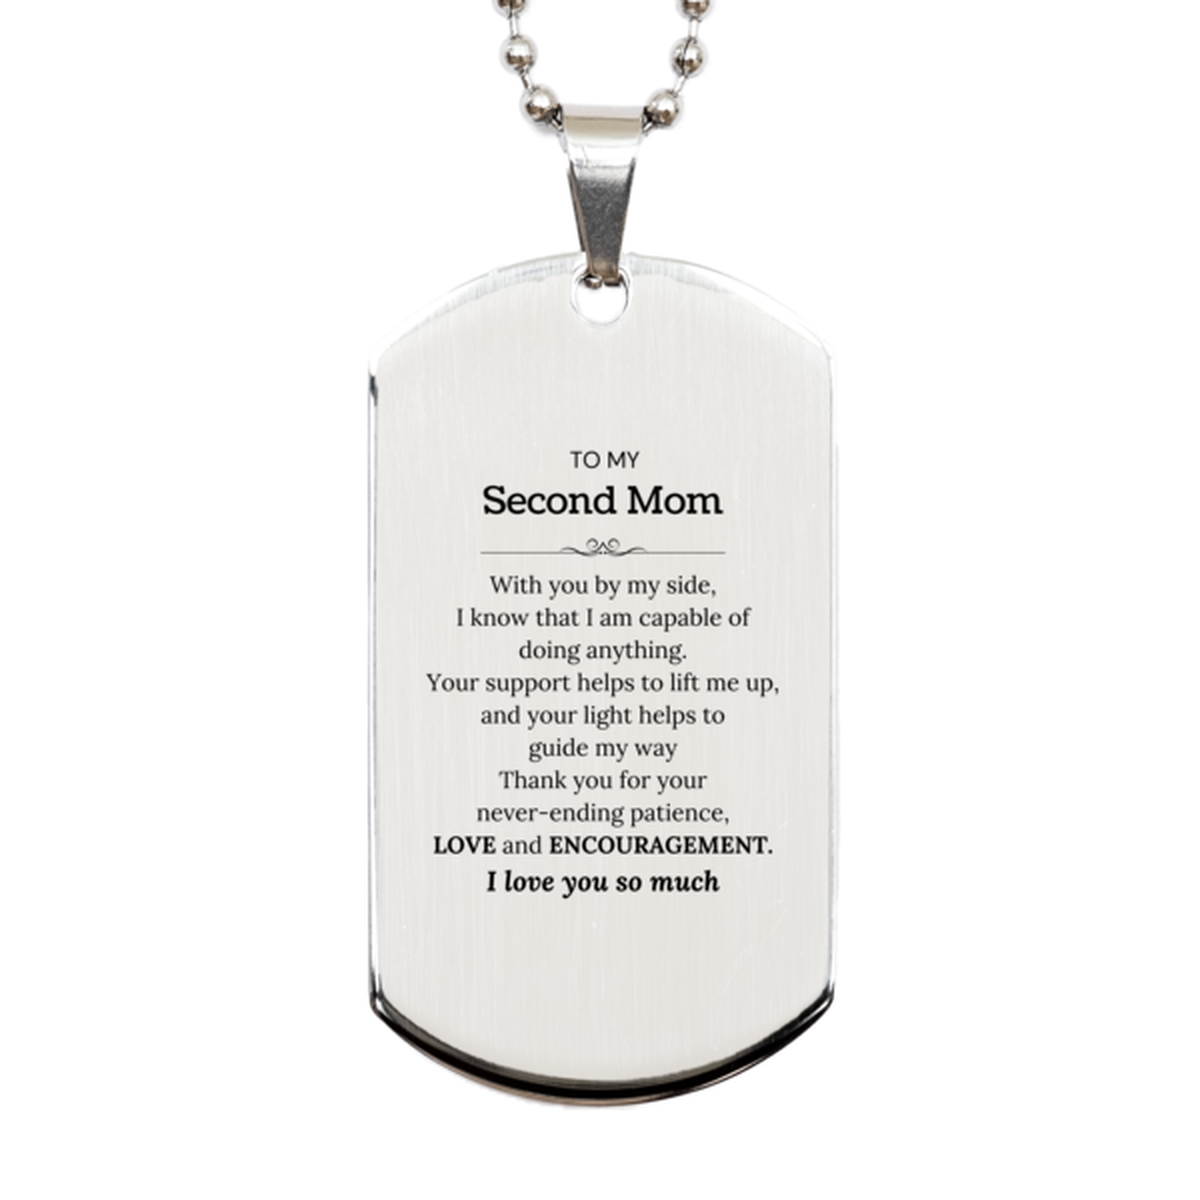 Appreciation Second Mom Silver Dog Tag Gifts, To My Second Mom Birthday Christmas Wedding Keepsake Gifts for Second Mom With you by my side, I know that I am capable of doing anything. I love you so much